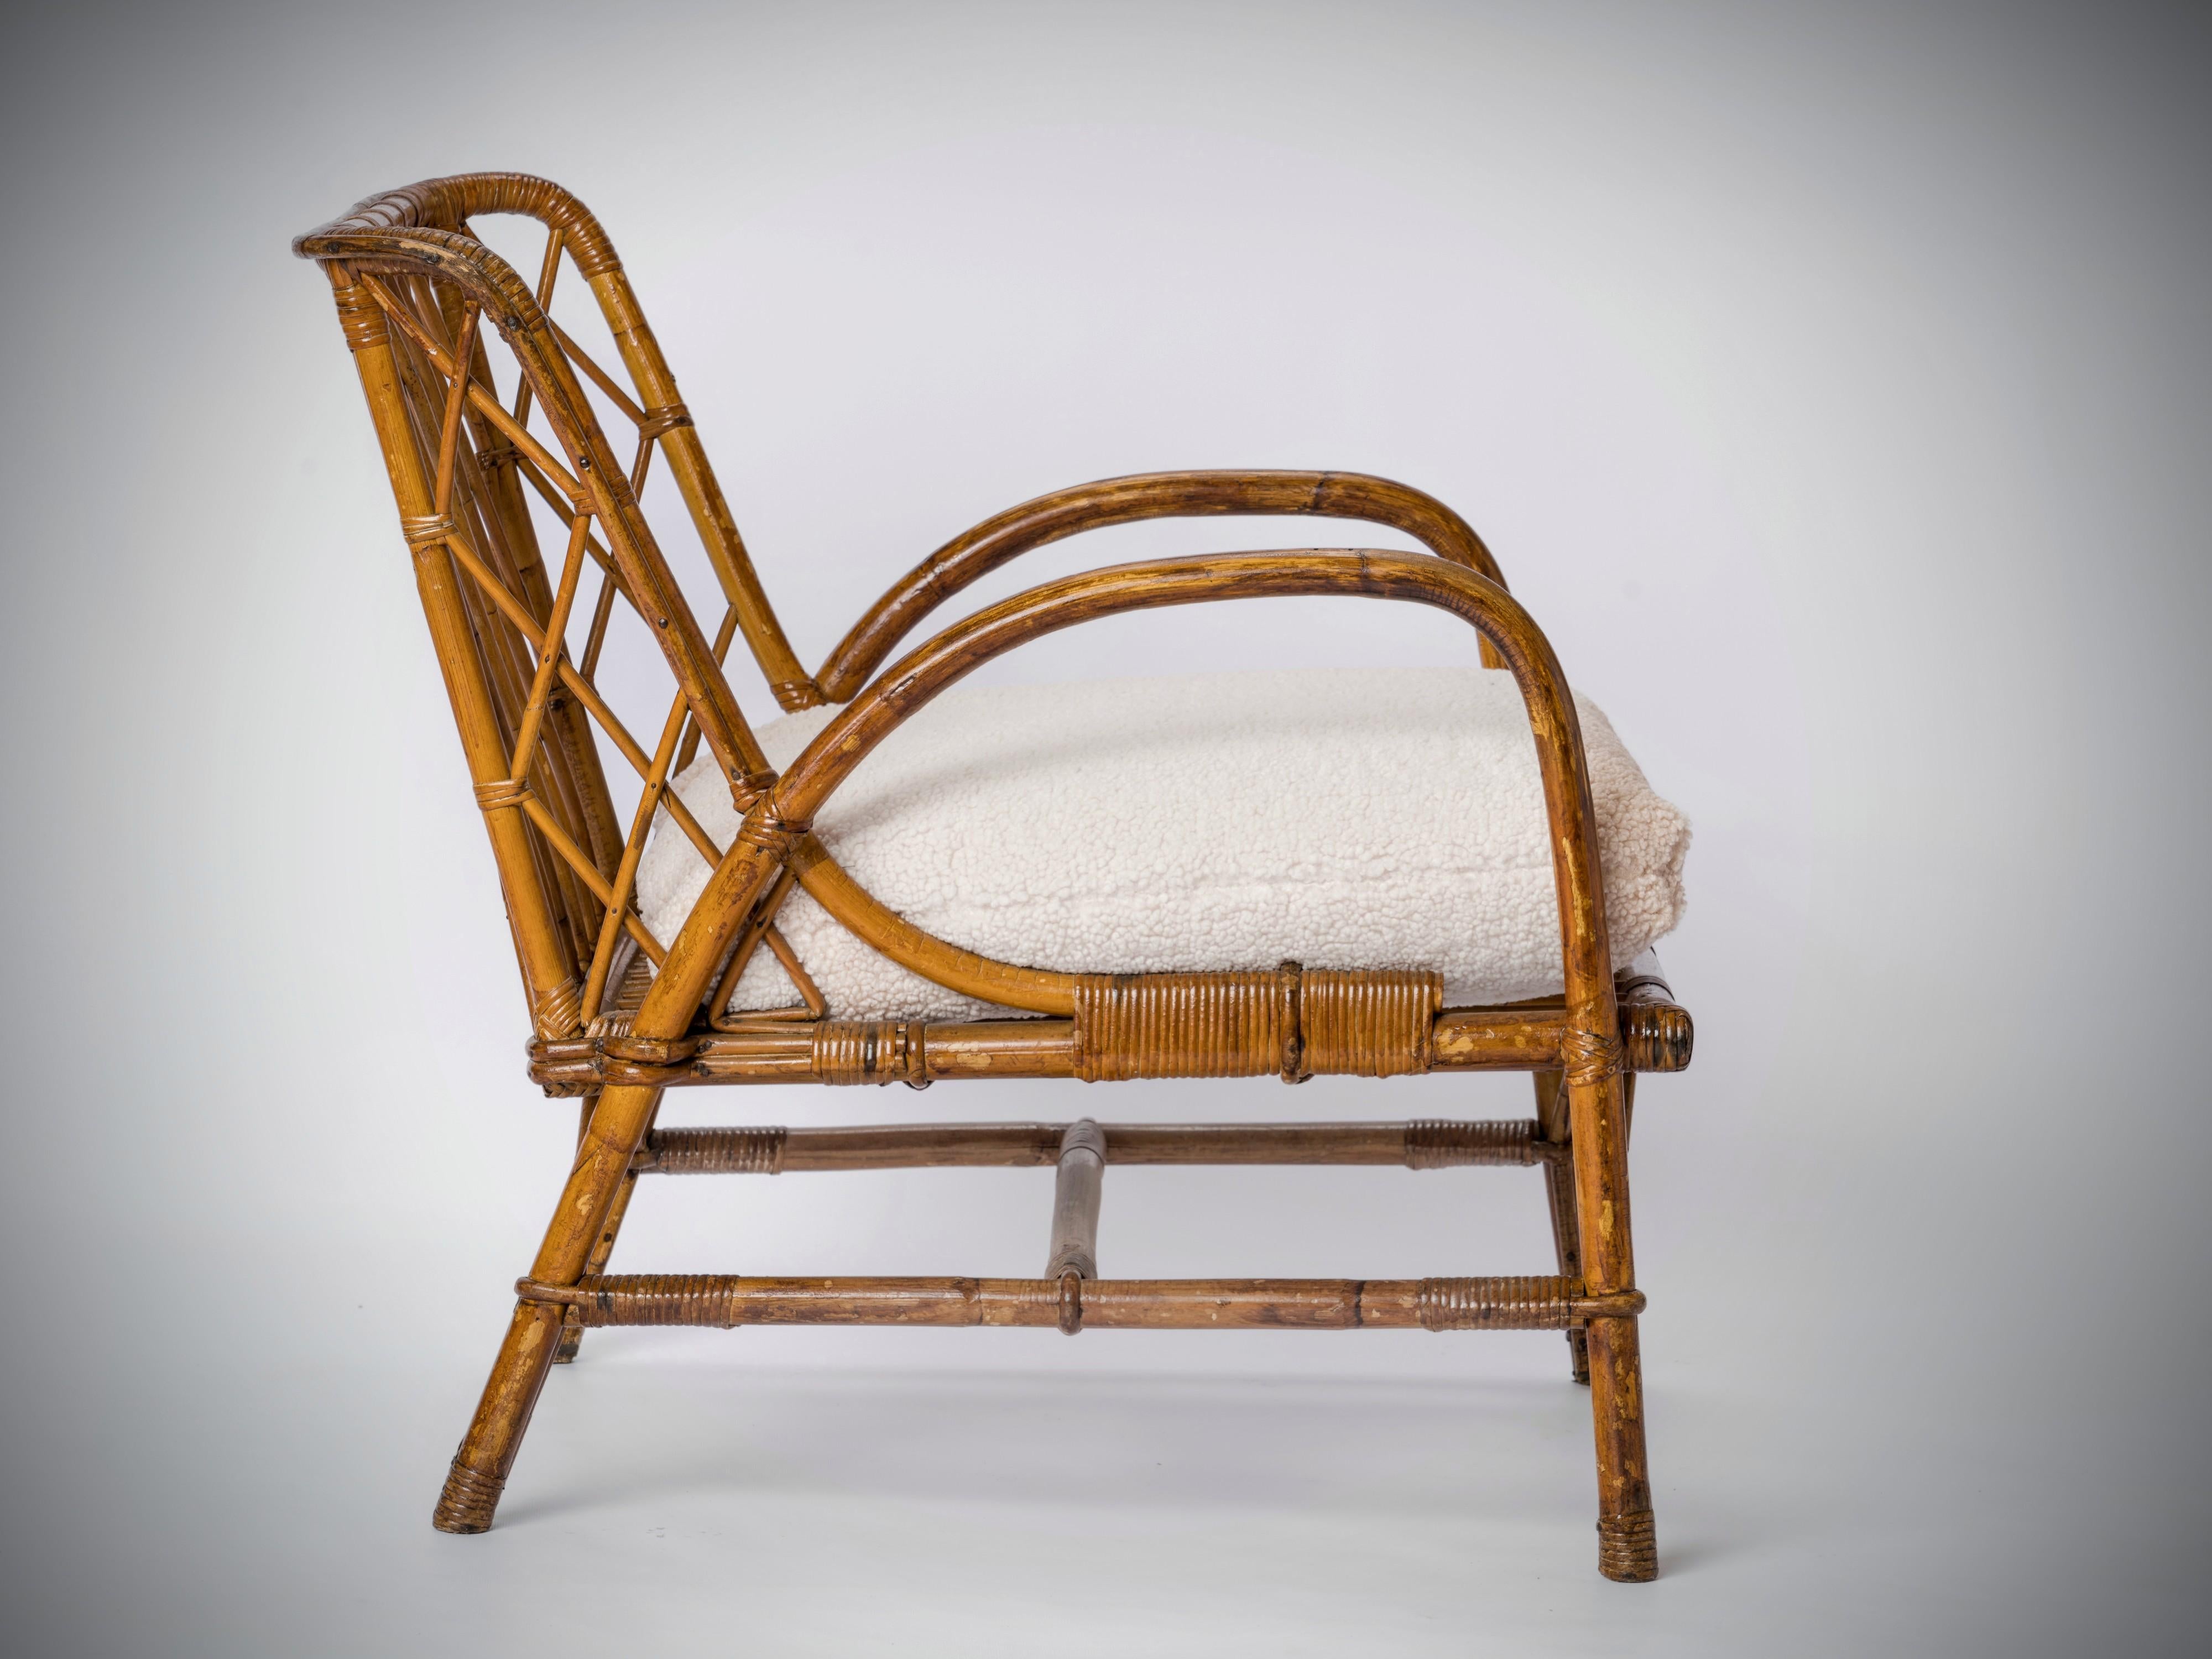 Basket shaped rattan lounger by Jacques Quinet for the city of Evian. Braided back rest structure. Lightly tinted rattan. In good vintage condition. 
Cushion for showing purposes. The chair sells without cushion but COM cushion can be made for an